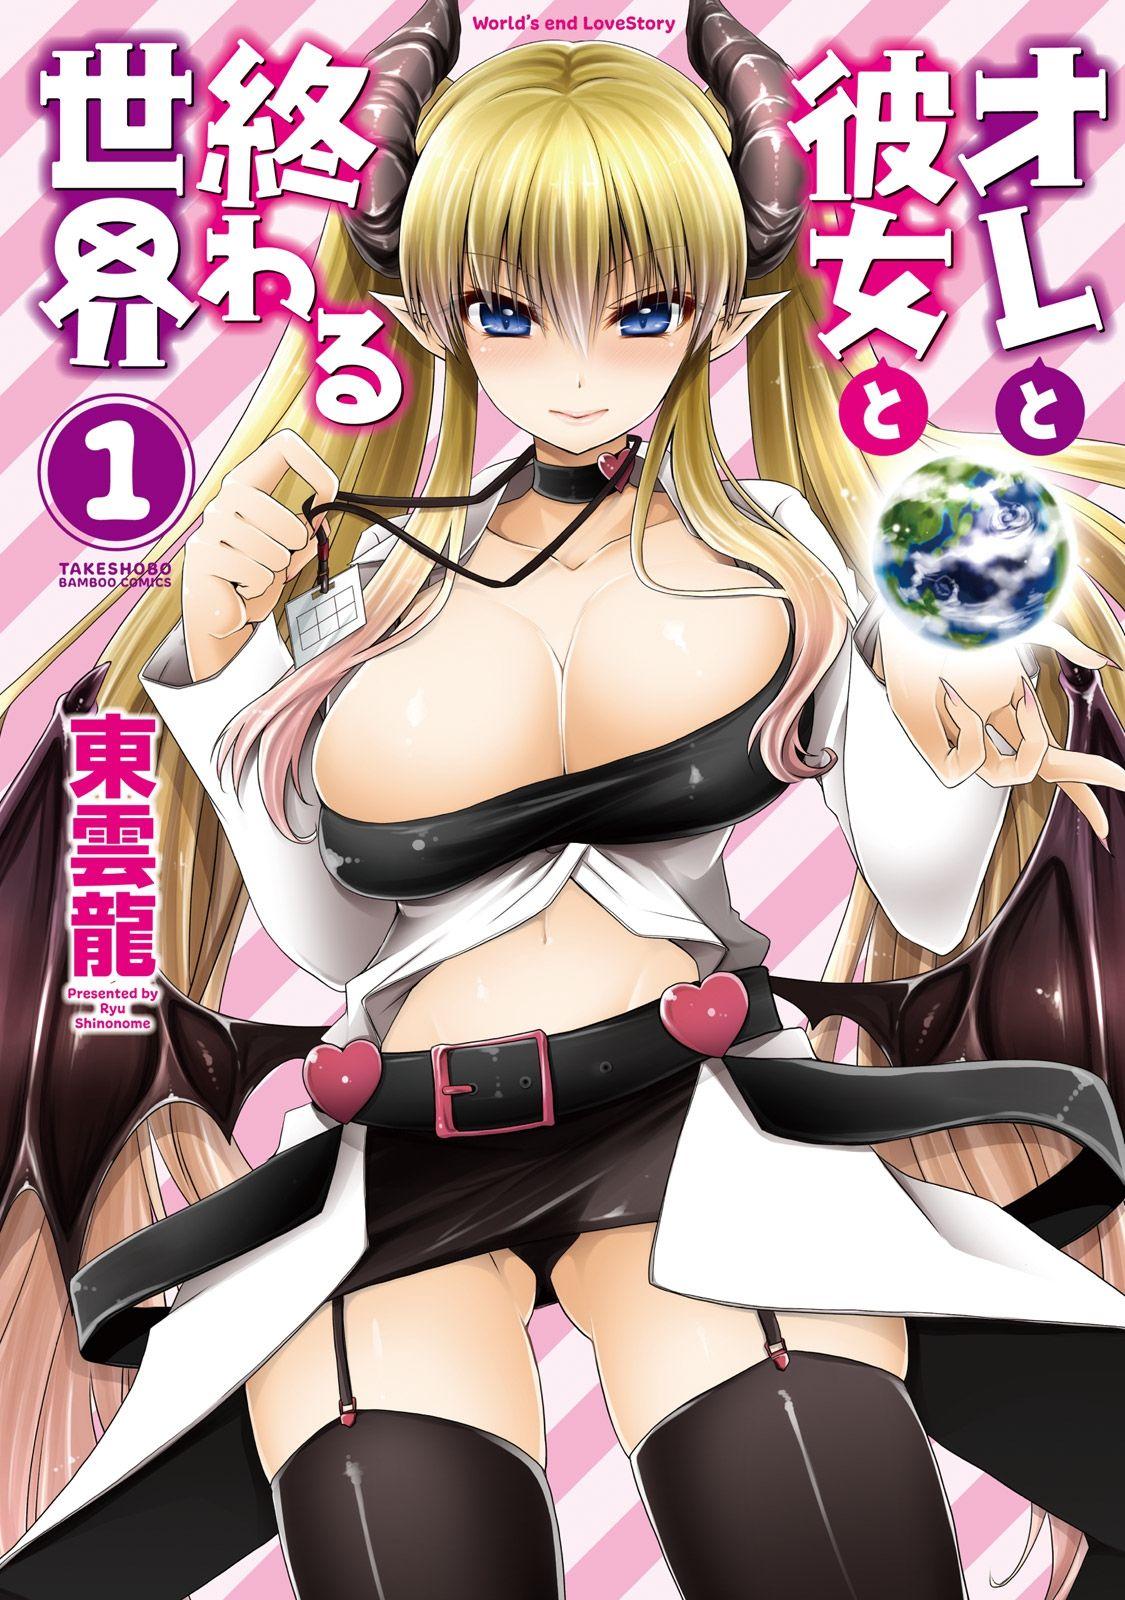 Blow Job Ore to Kanojo to Owaru Sekai - World's end LoveStory 1 Clothed Sex - Page 2